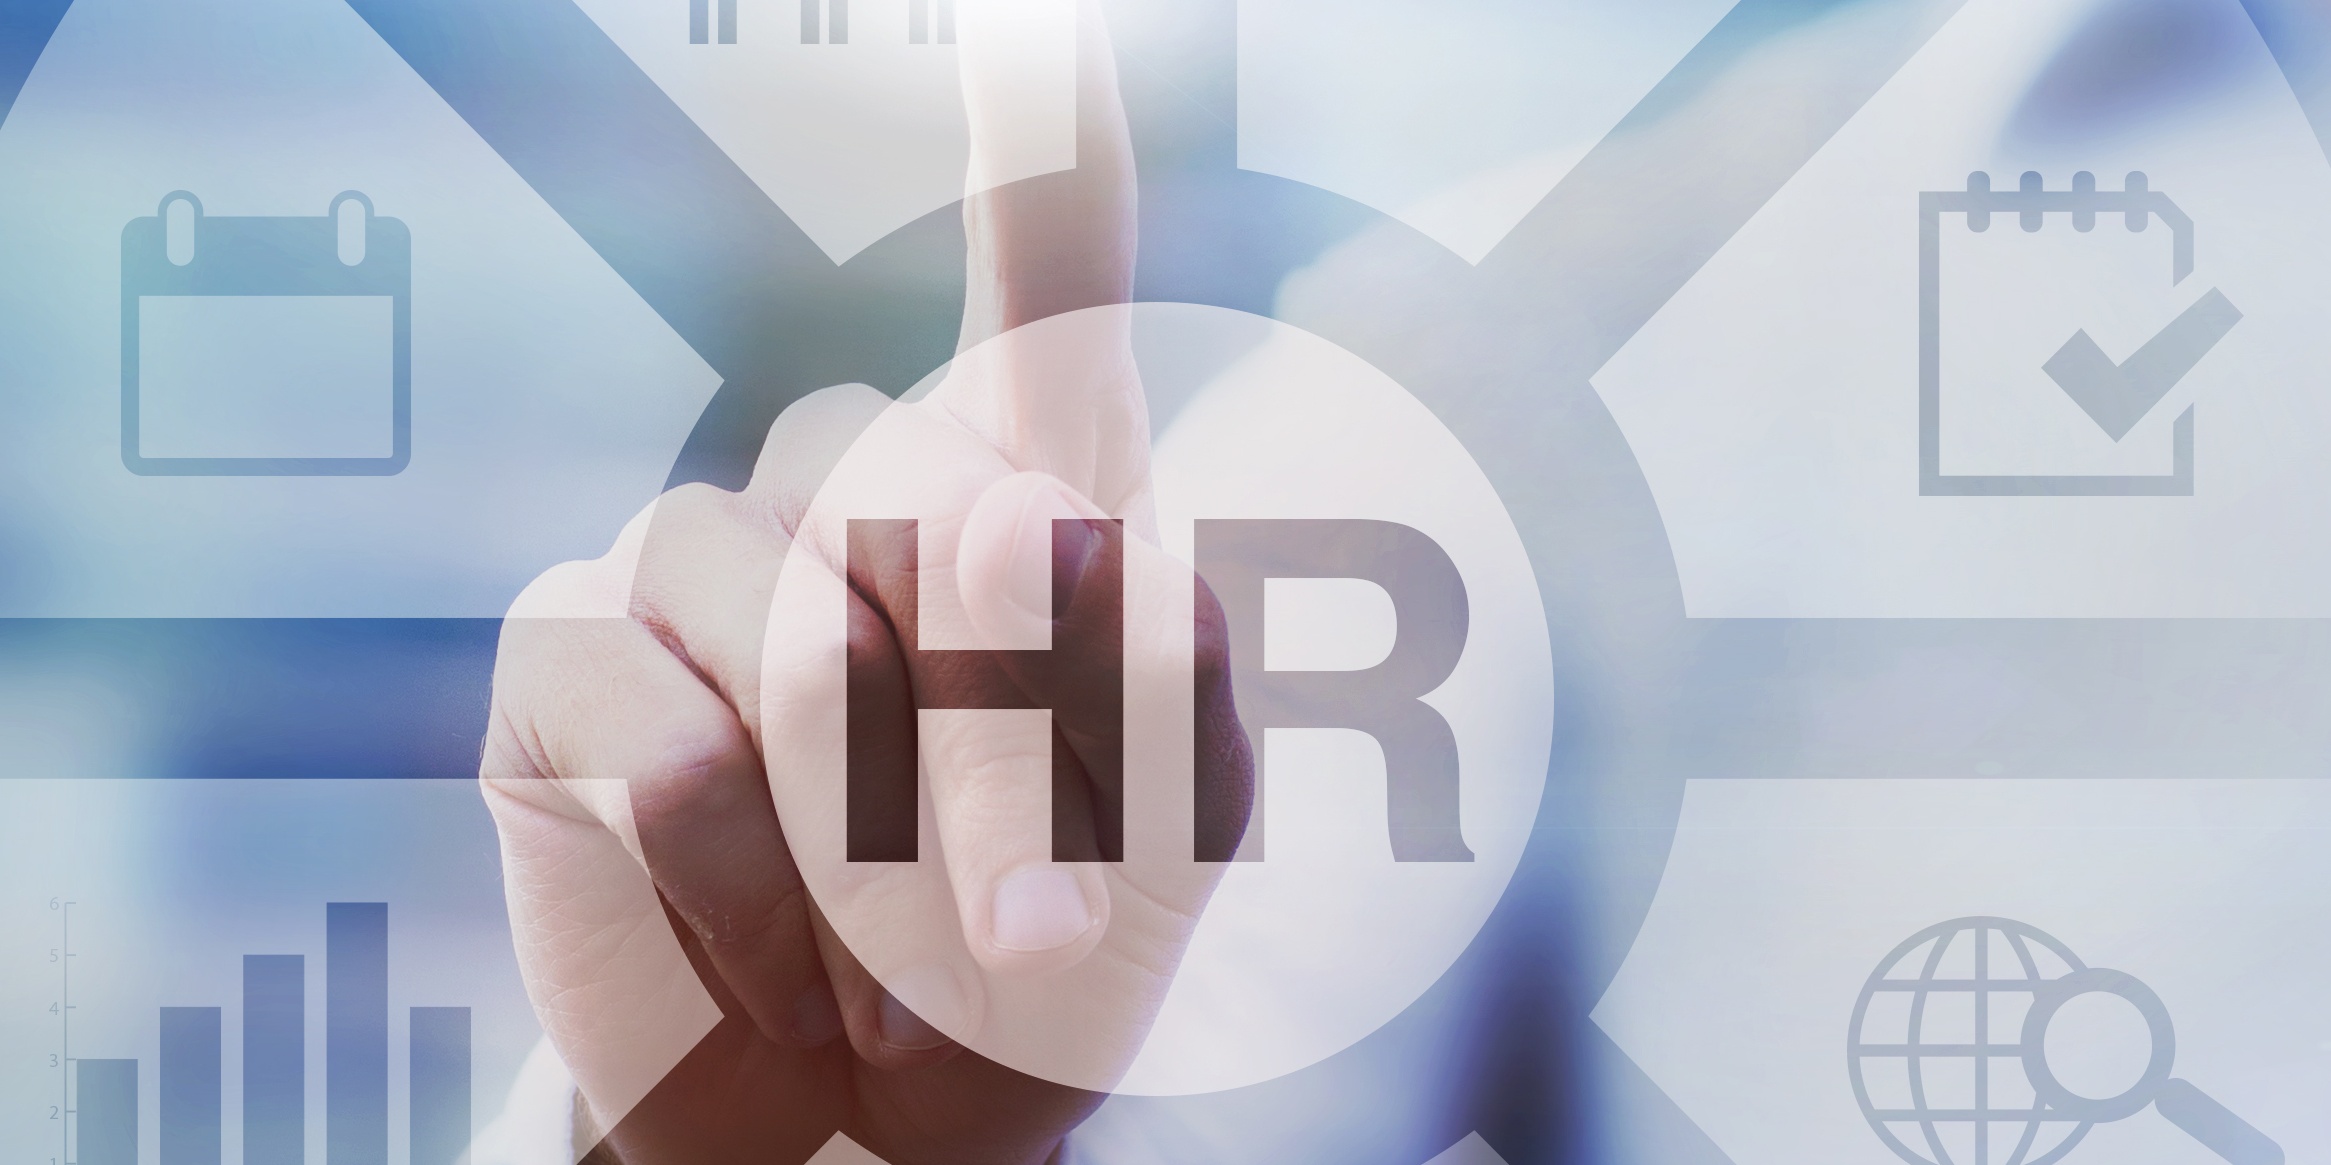 How Is Technology Changing The Way HR is Done?